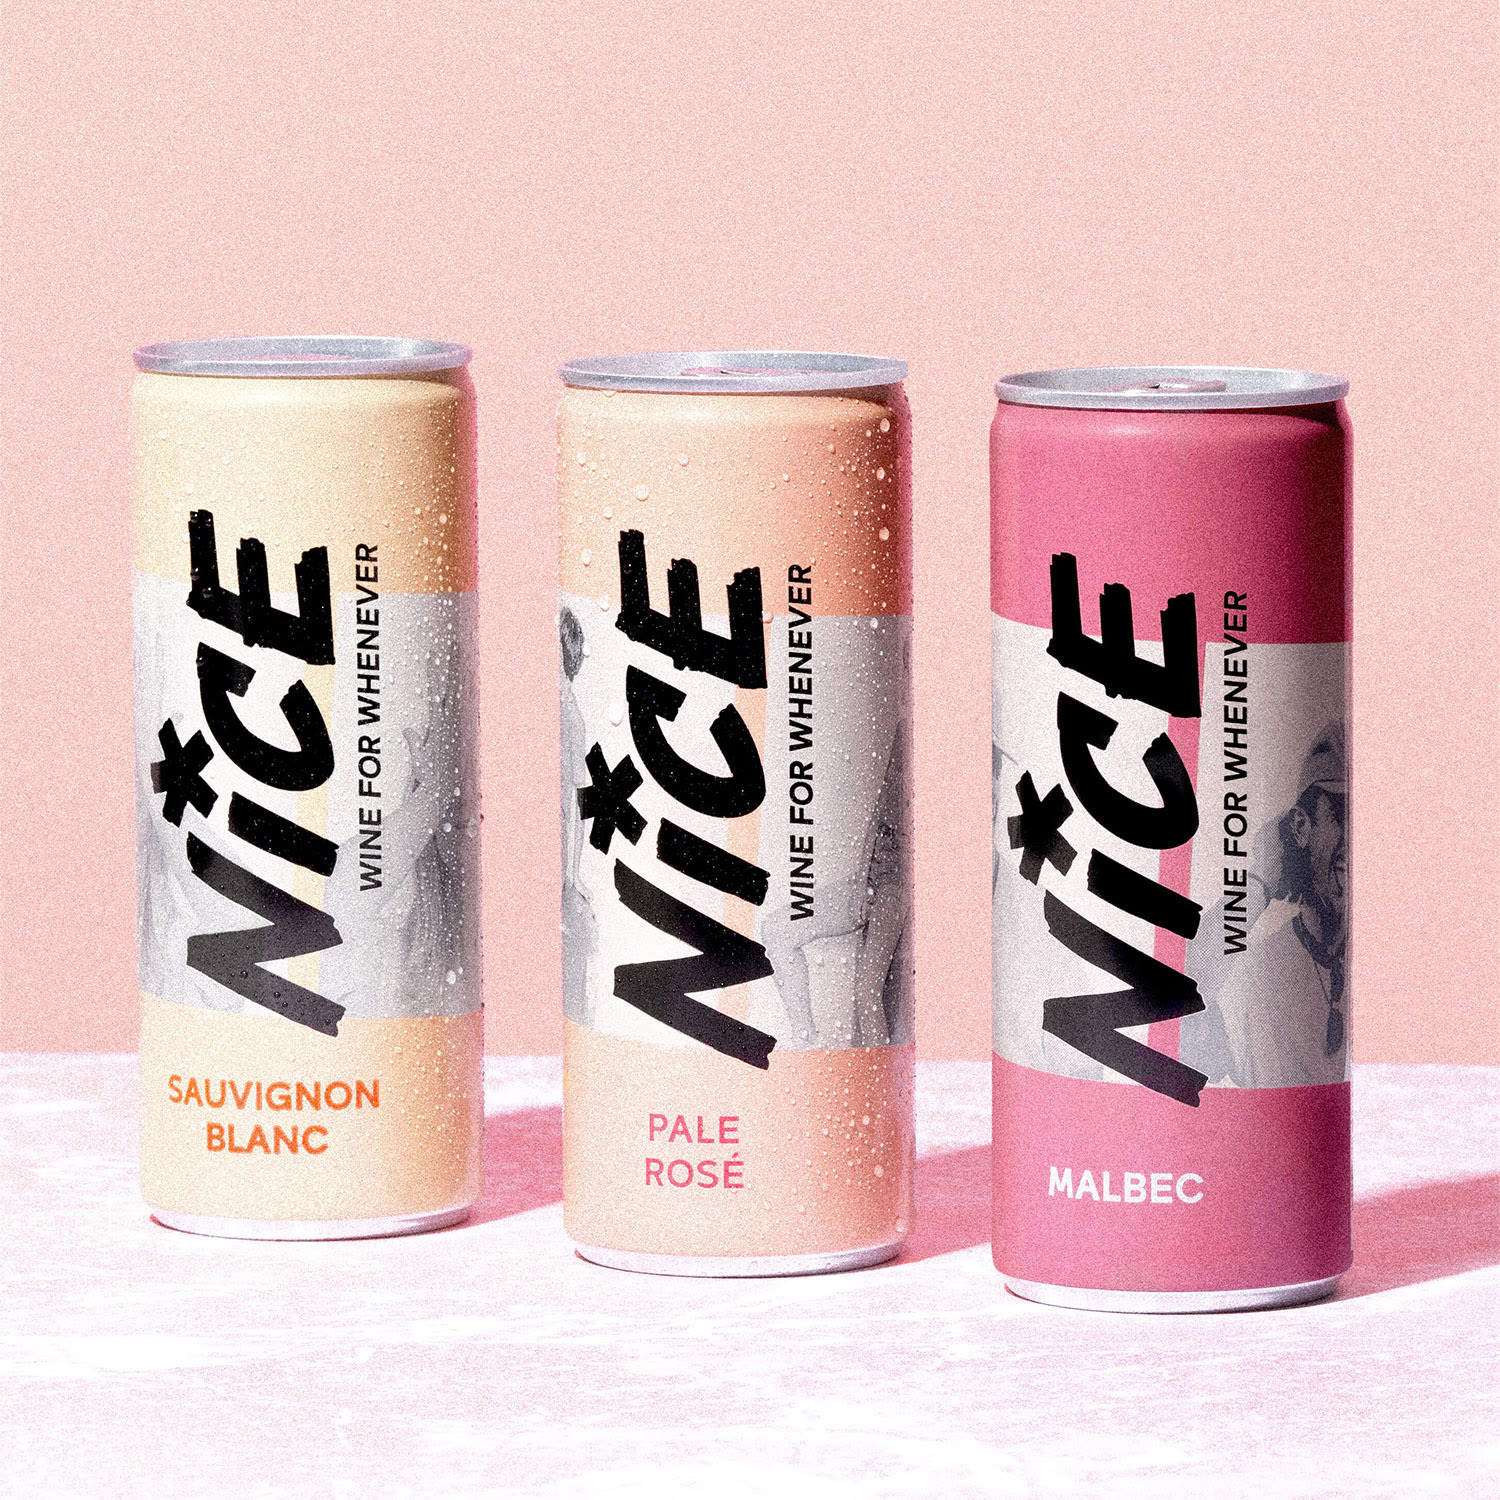 Three cans of wine from Nice Drinks